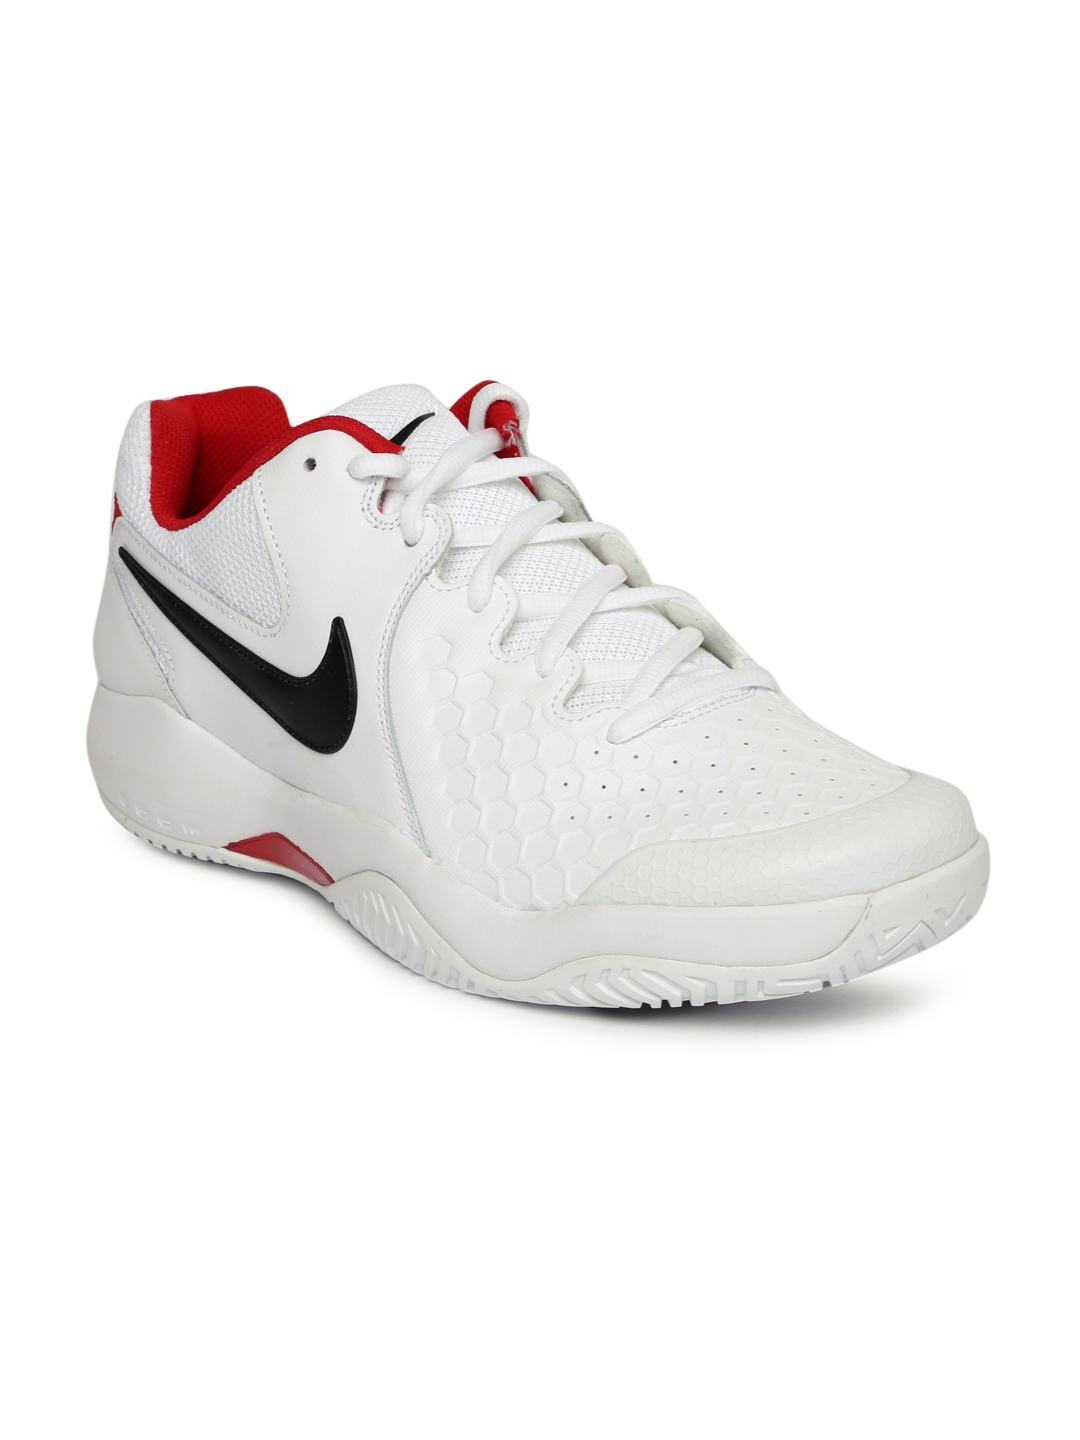 Buy Nike Men White AIR ZOOM RESISTANCE Tennis Shoes - Sports Shoes for